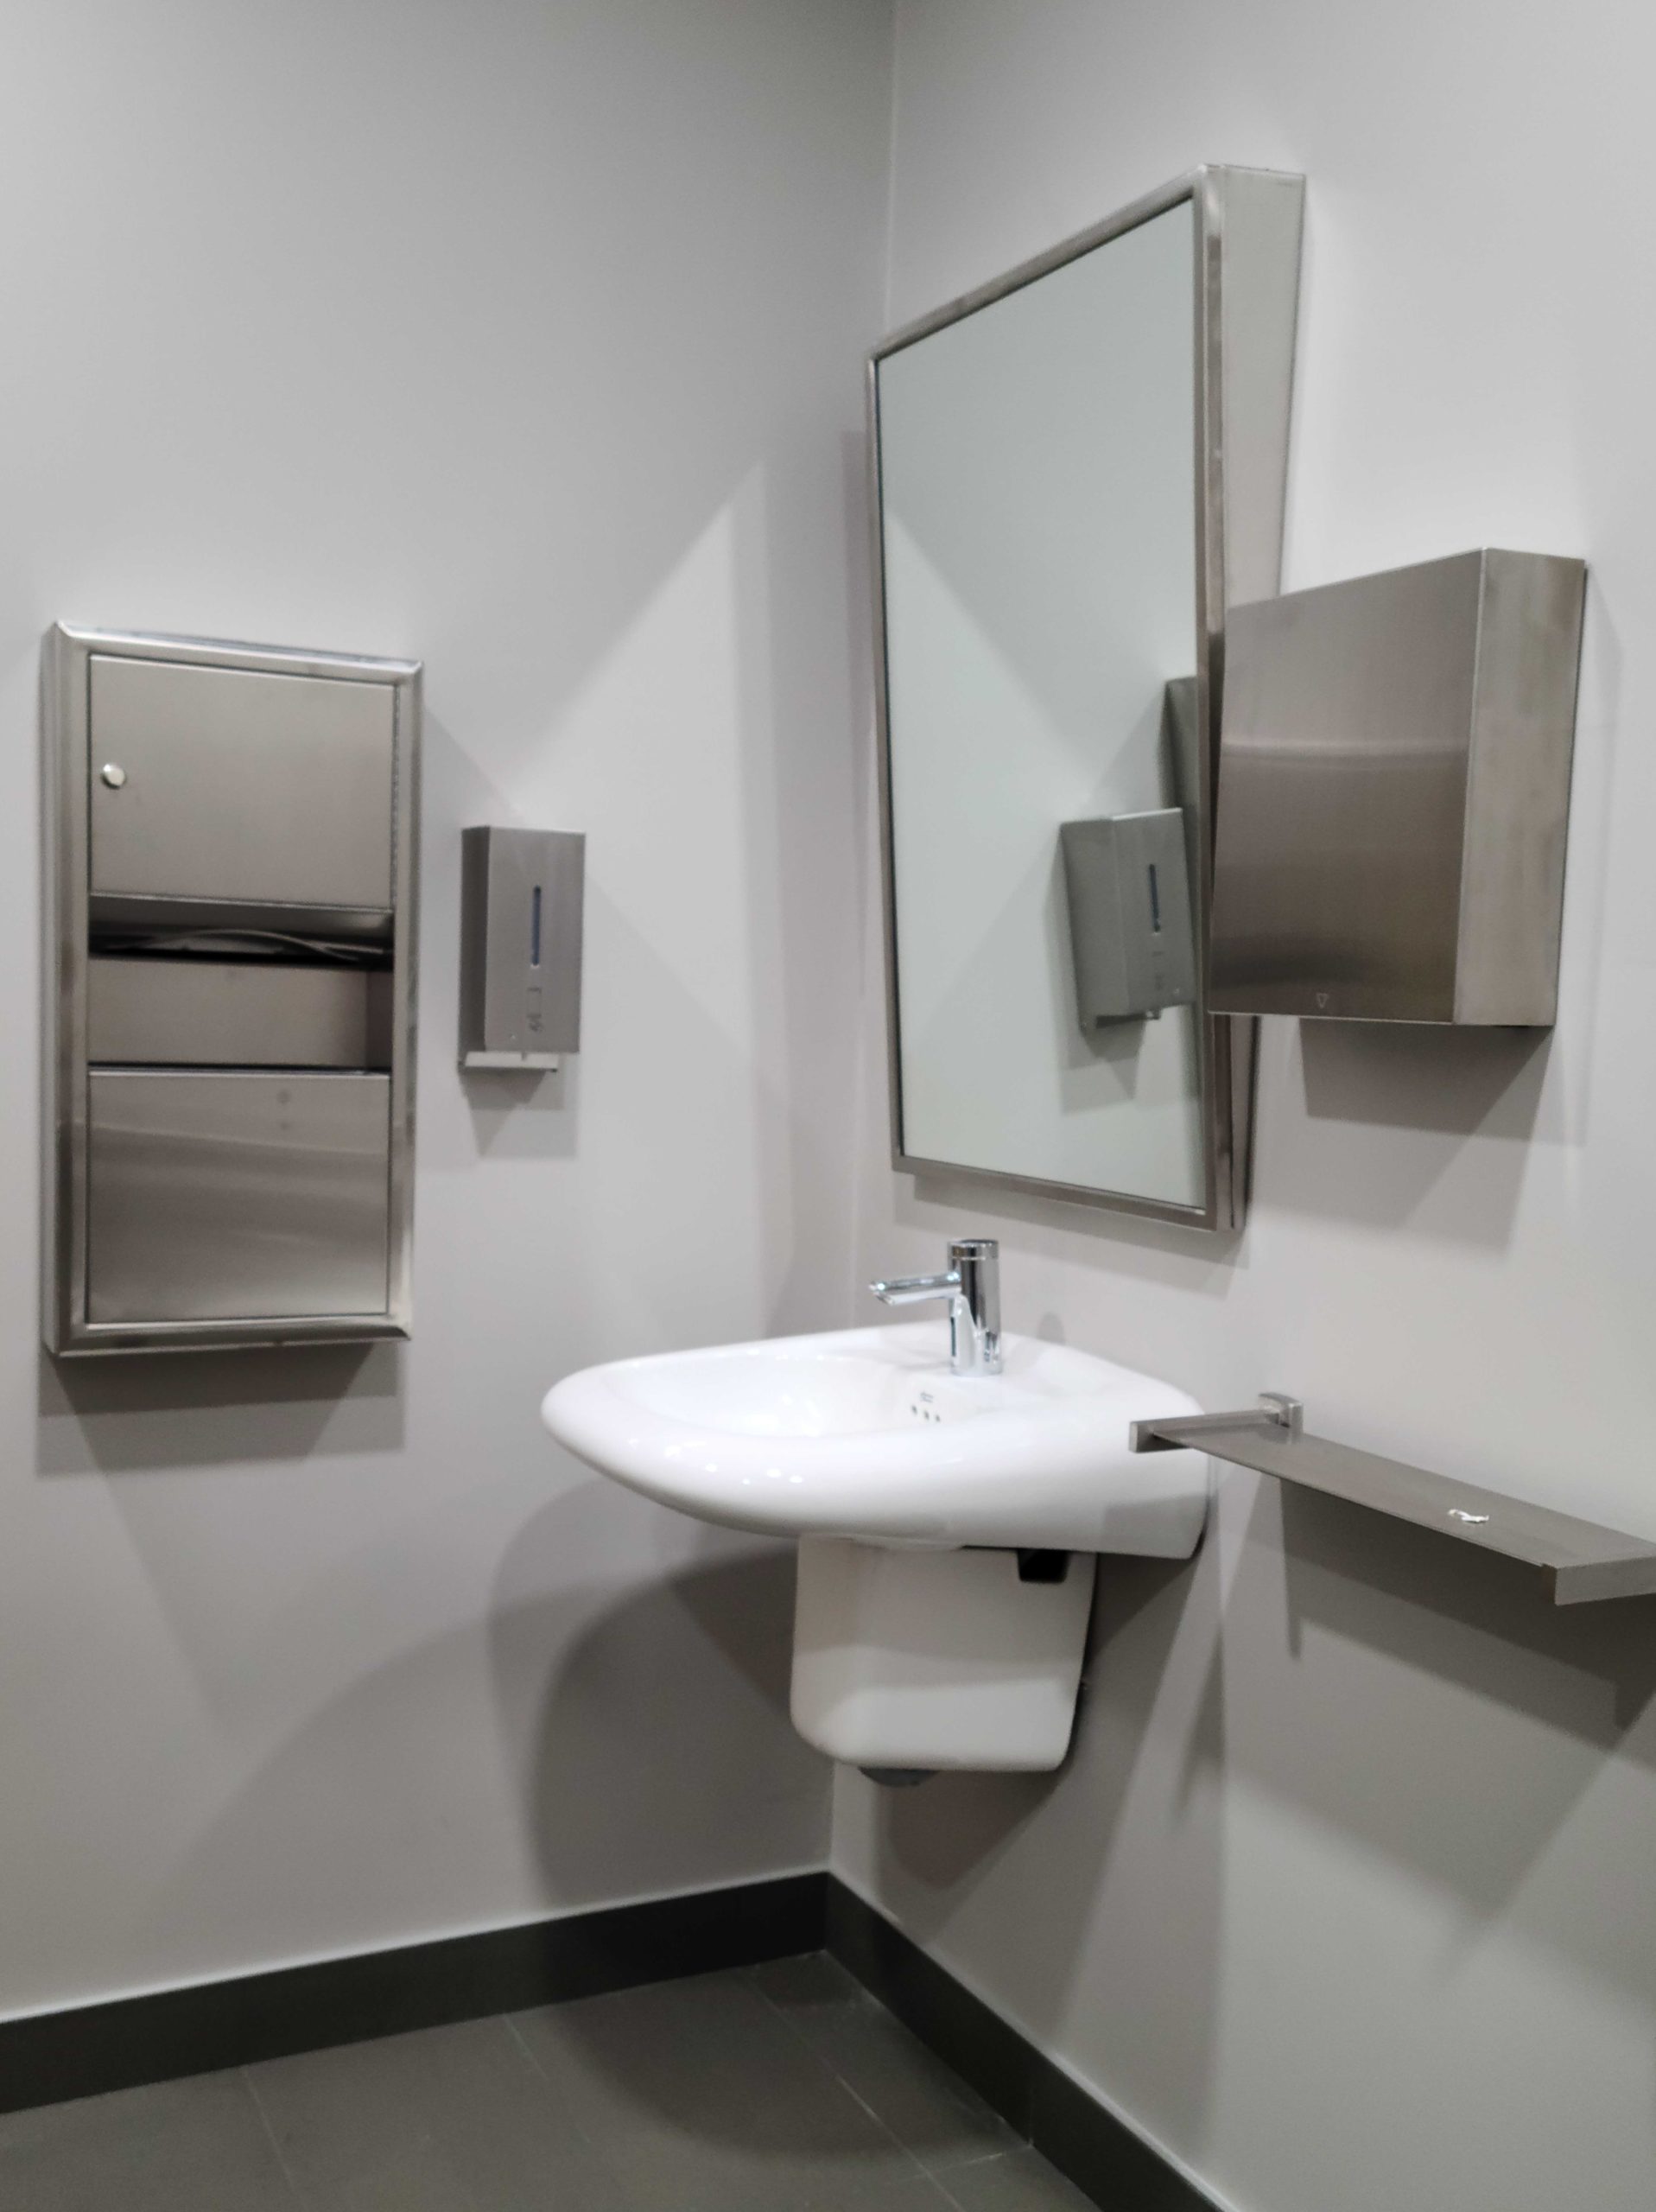 Low restroom sink with downward-angled mirror, dispensers and receptacles for toiletries, and a small shelf